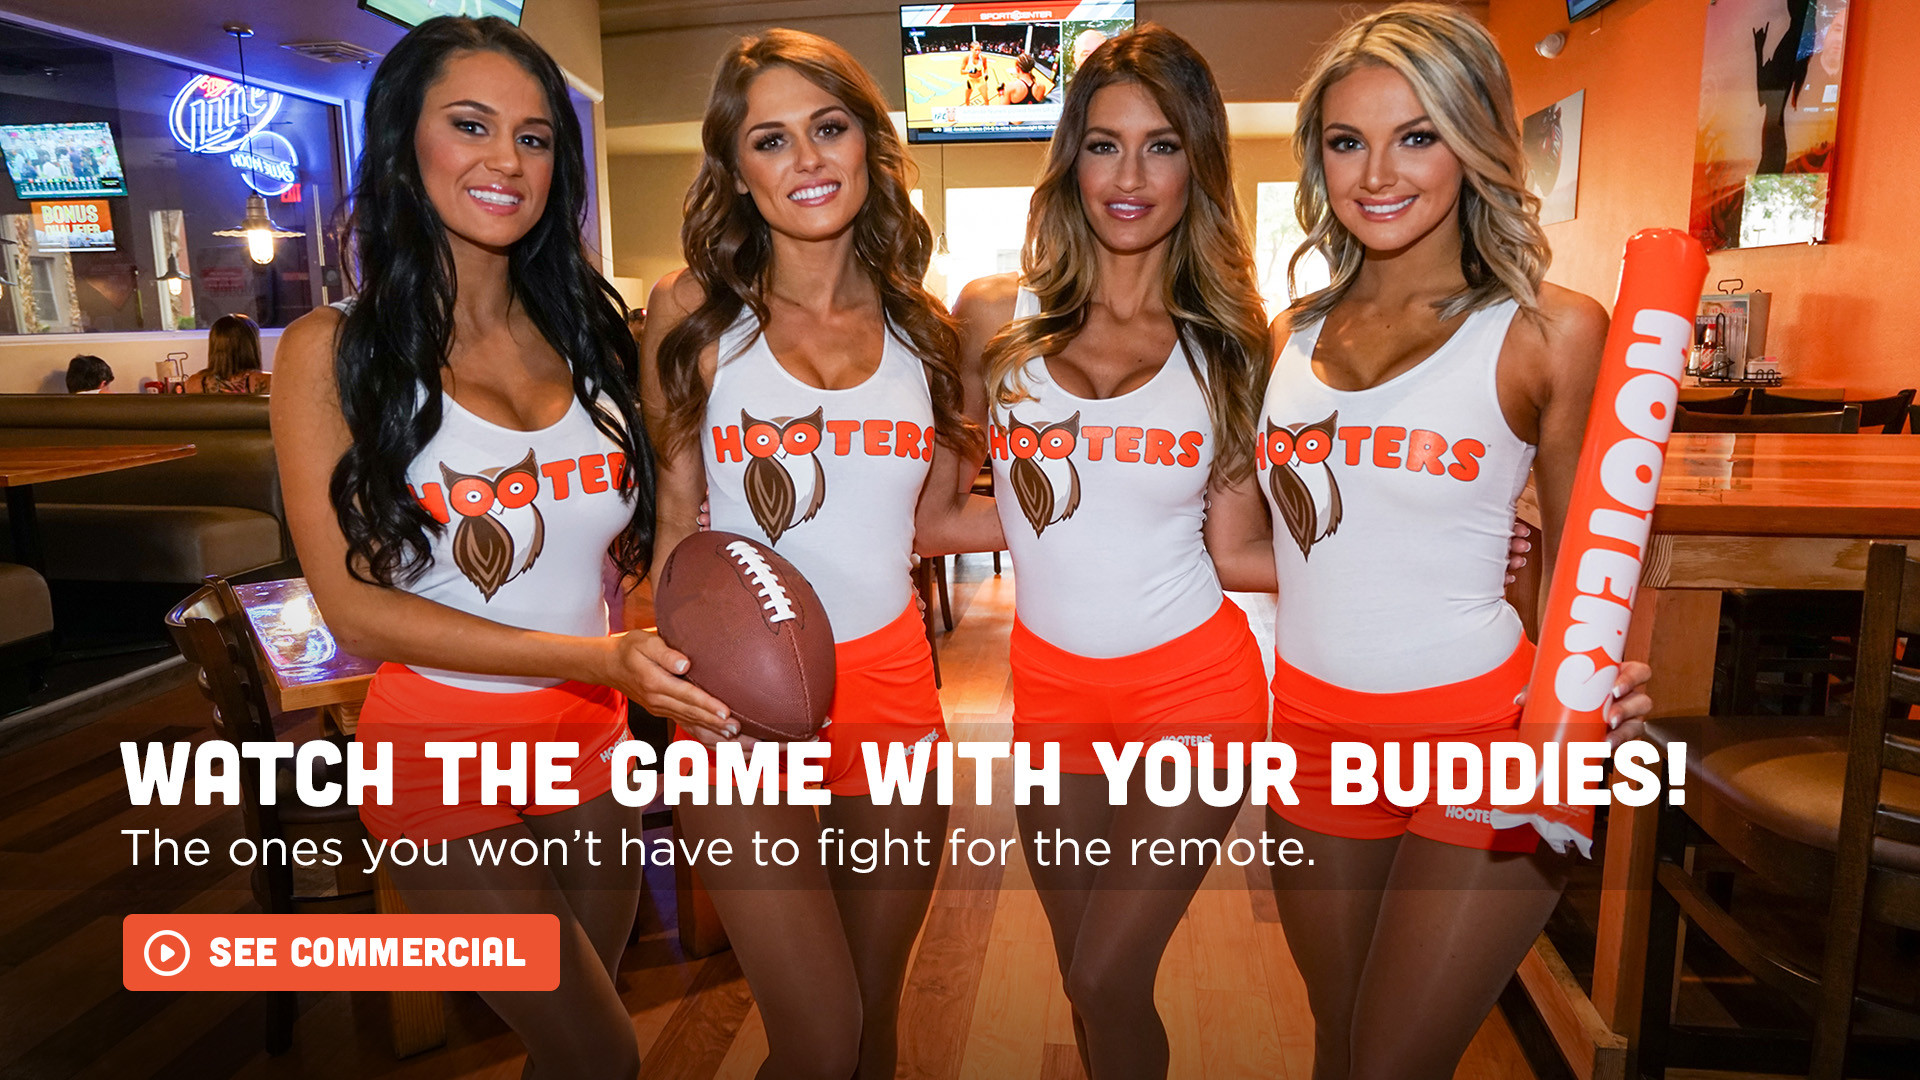 1920x1080 Watch Football With All Your Buddies at Hooters!